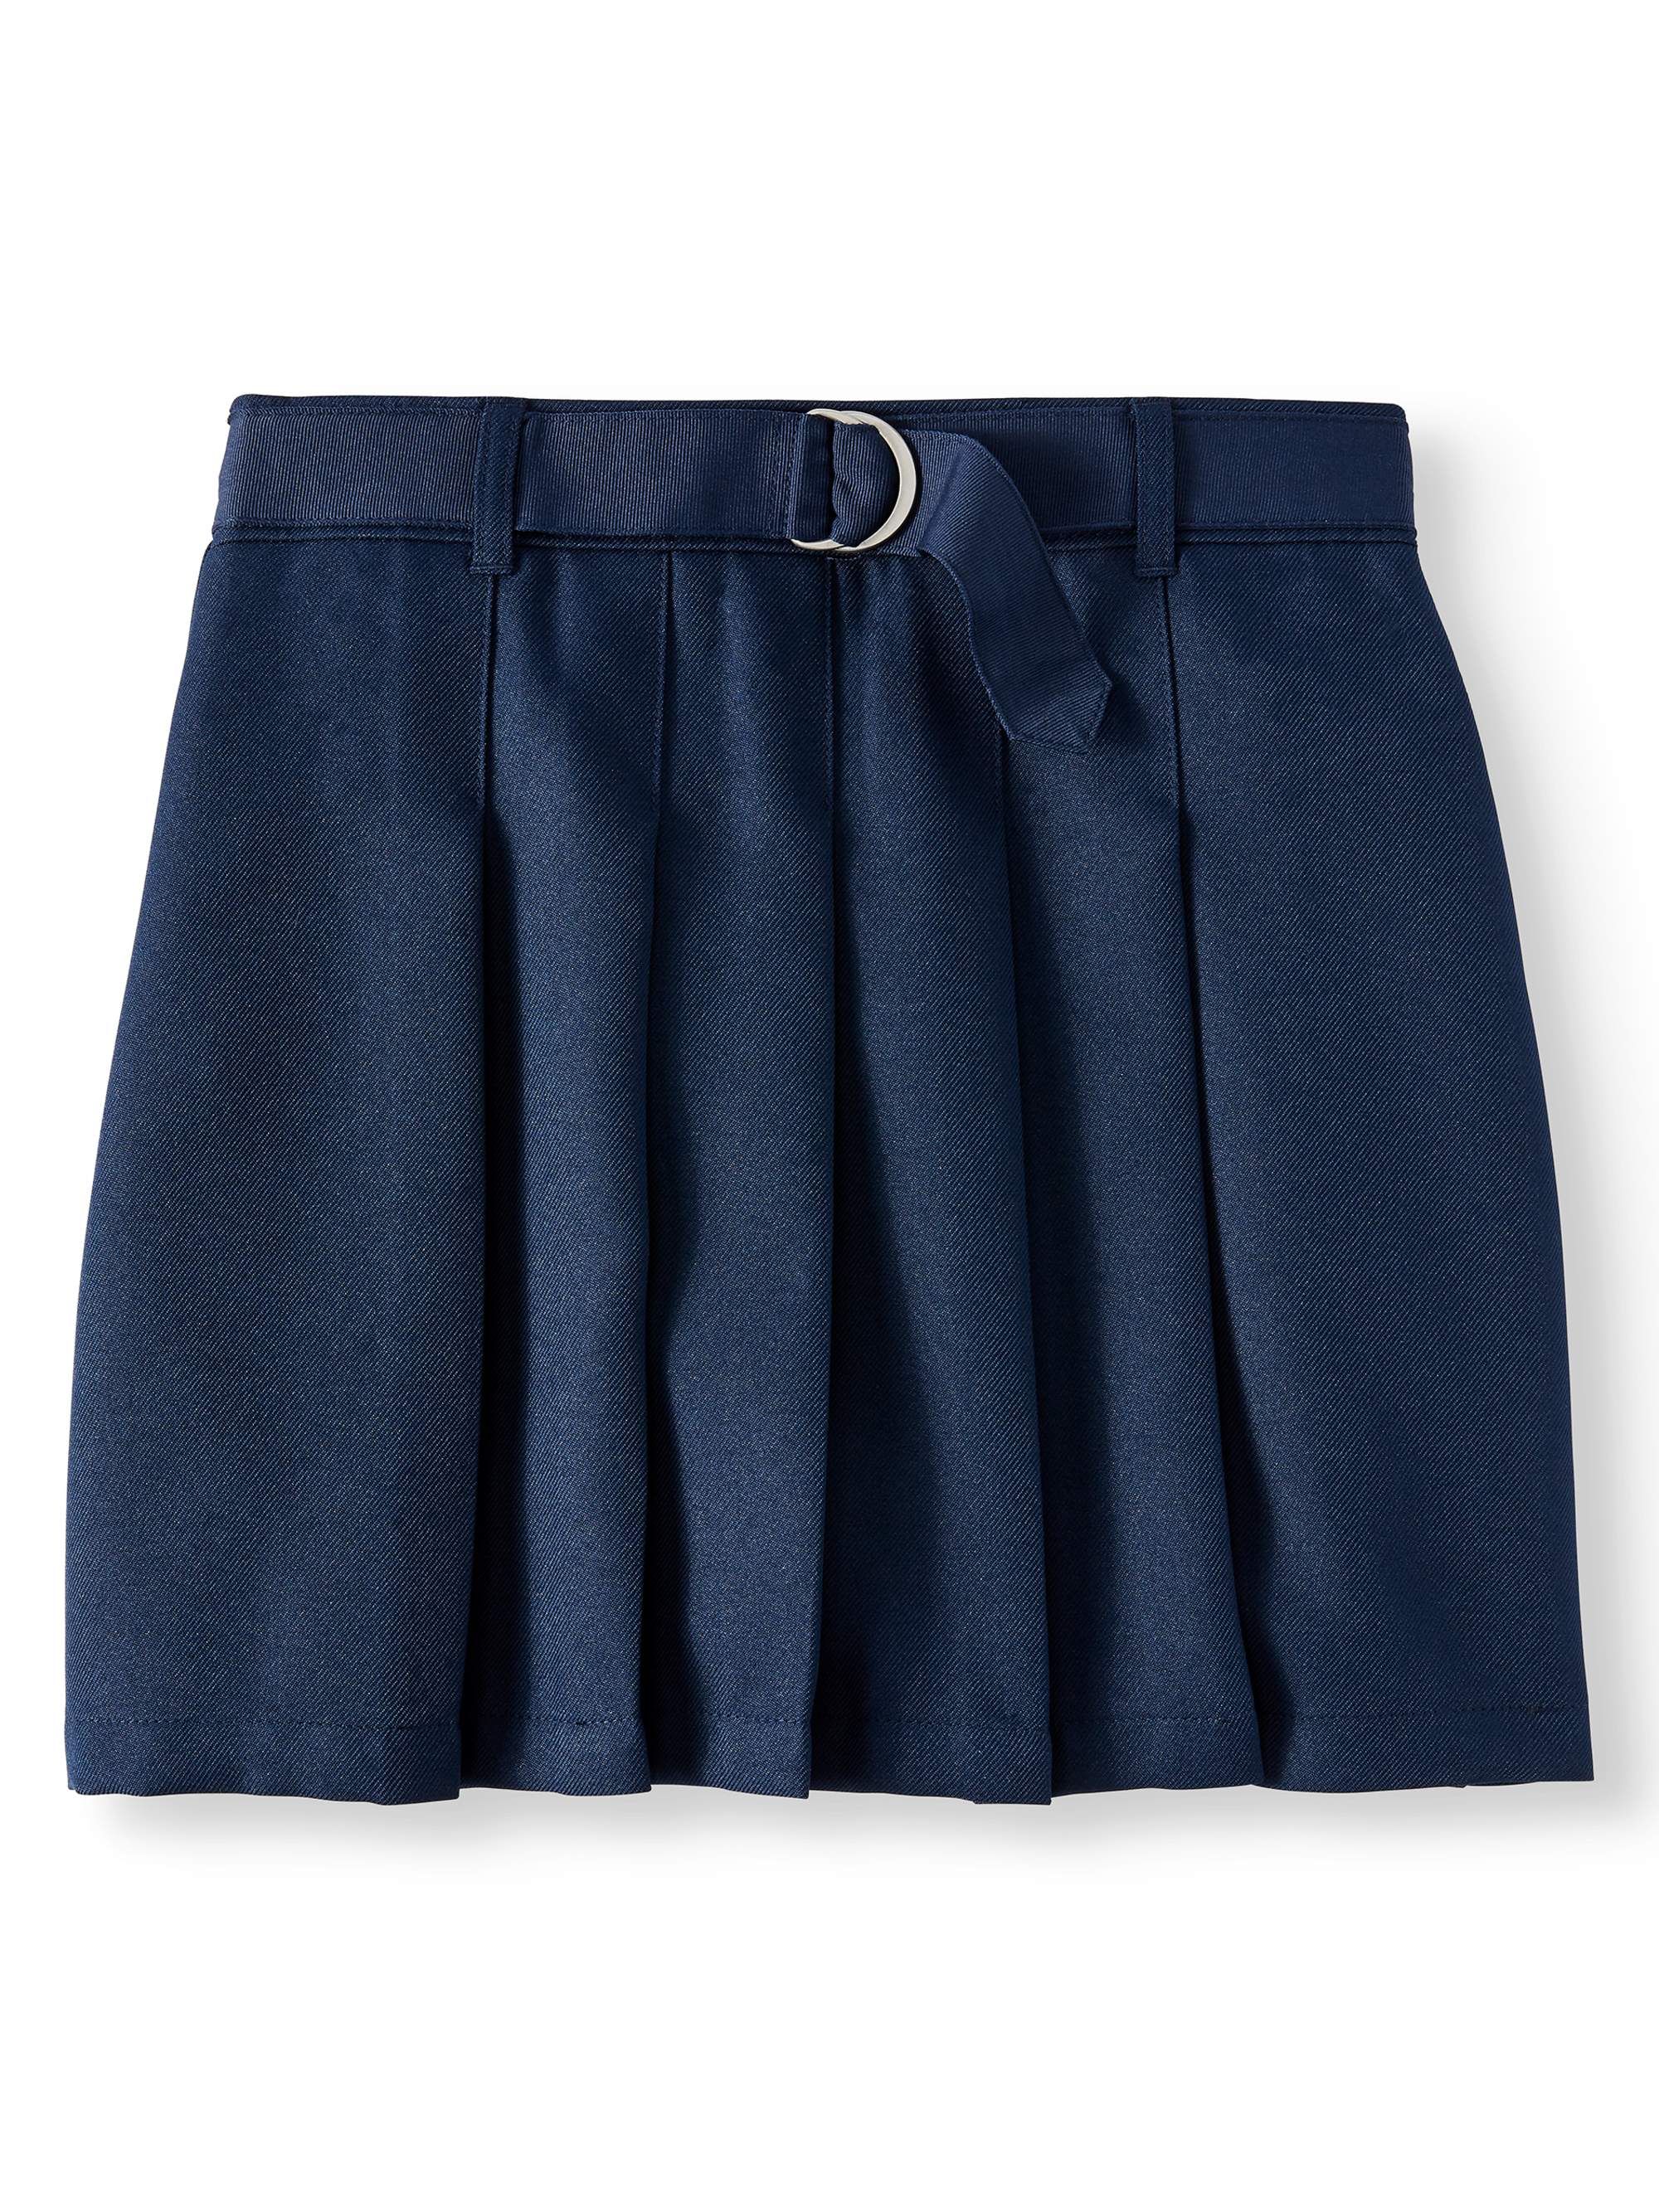 Wonder Nation Girls School Uniform Pleated Belted Scooter Skirt, Sizes 4-16 & Plus - image 1 of 3